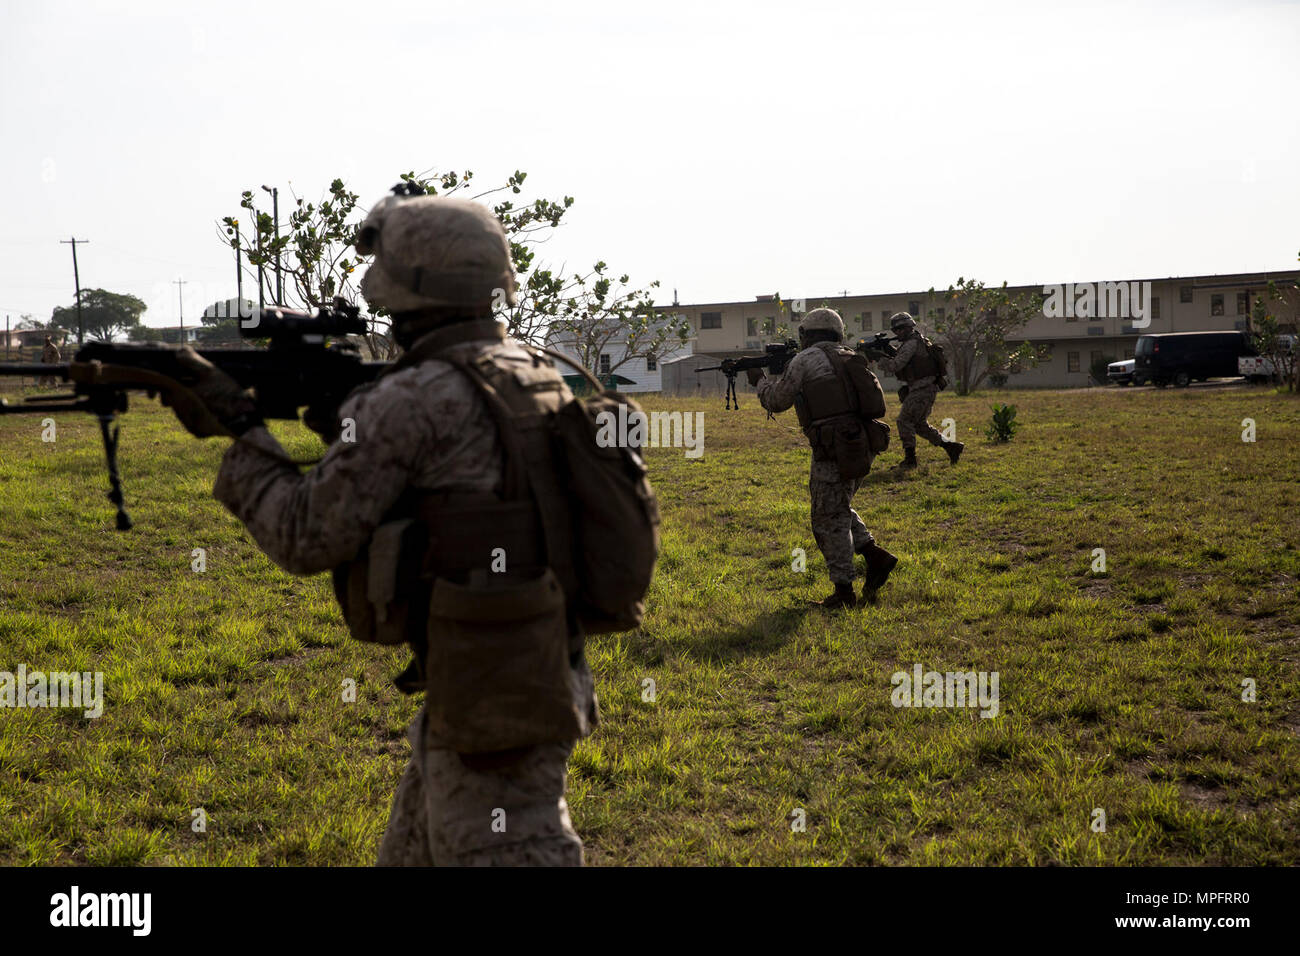 Marines rush a simulated enemy firing position at Naval Station Guantanamo Bay, Cuba, April 9, 2017. The Marines were participating in battle drills to practice squad movement and unit integrity. The Marines are with 3rd Battalion, 2nd Marine Regiment. Stock Photo